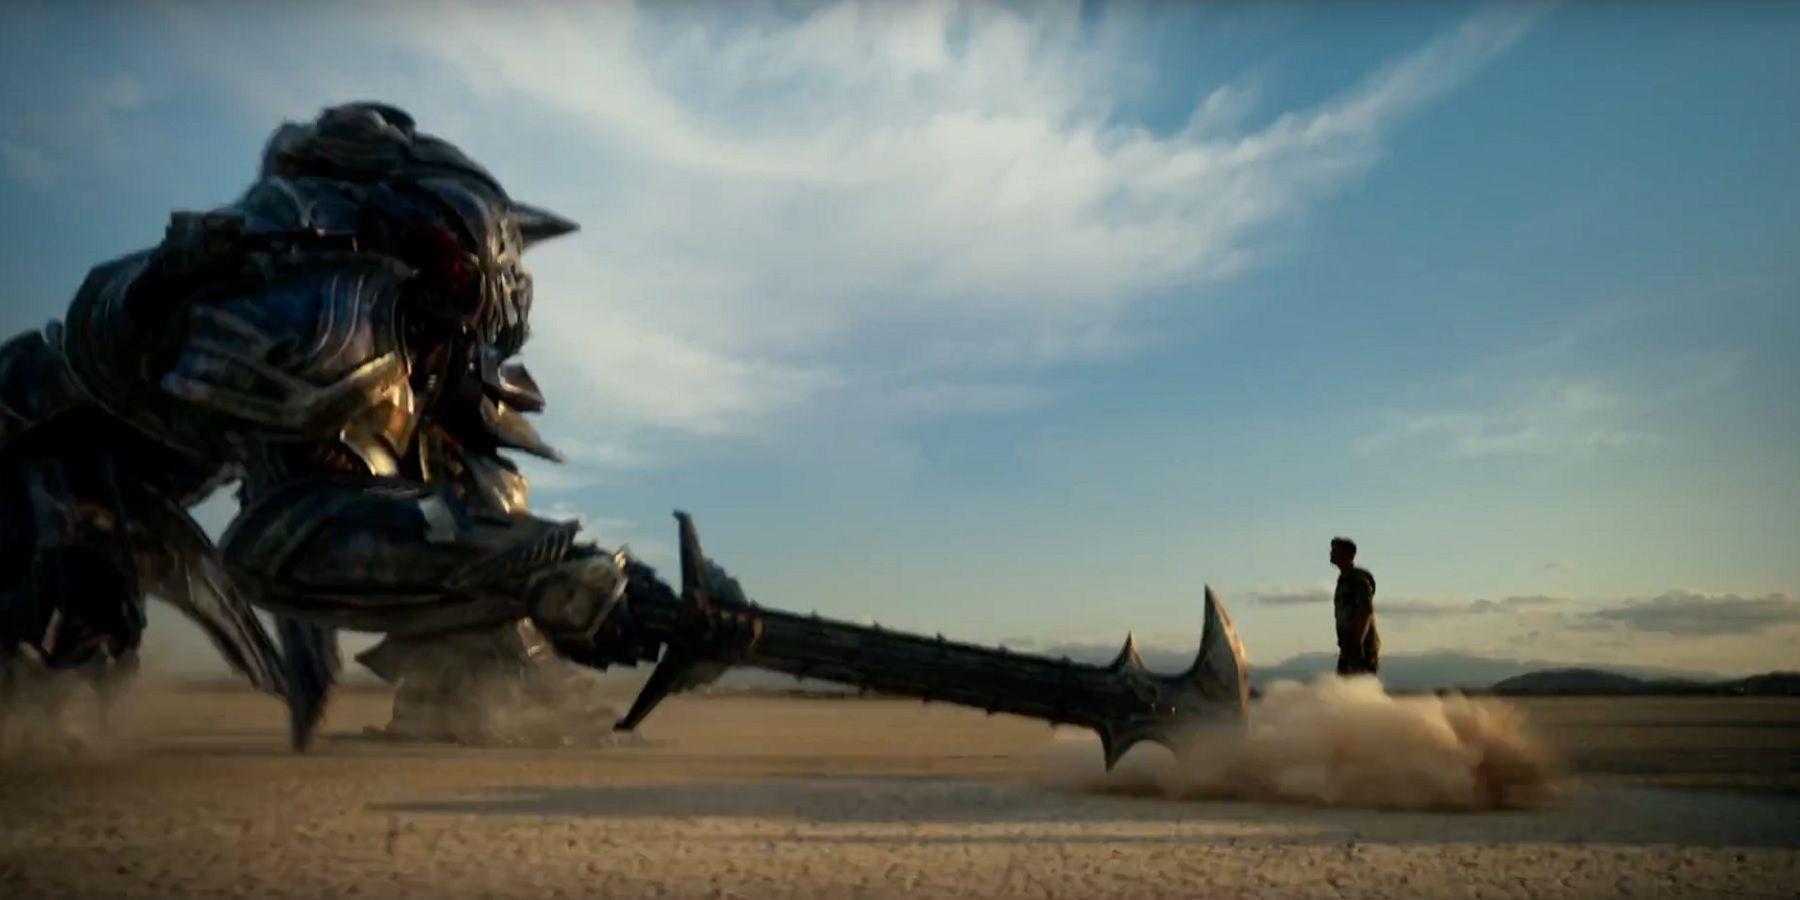 Transformers The Last Knight Trailer - Megatron with sword